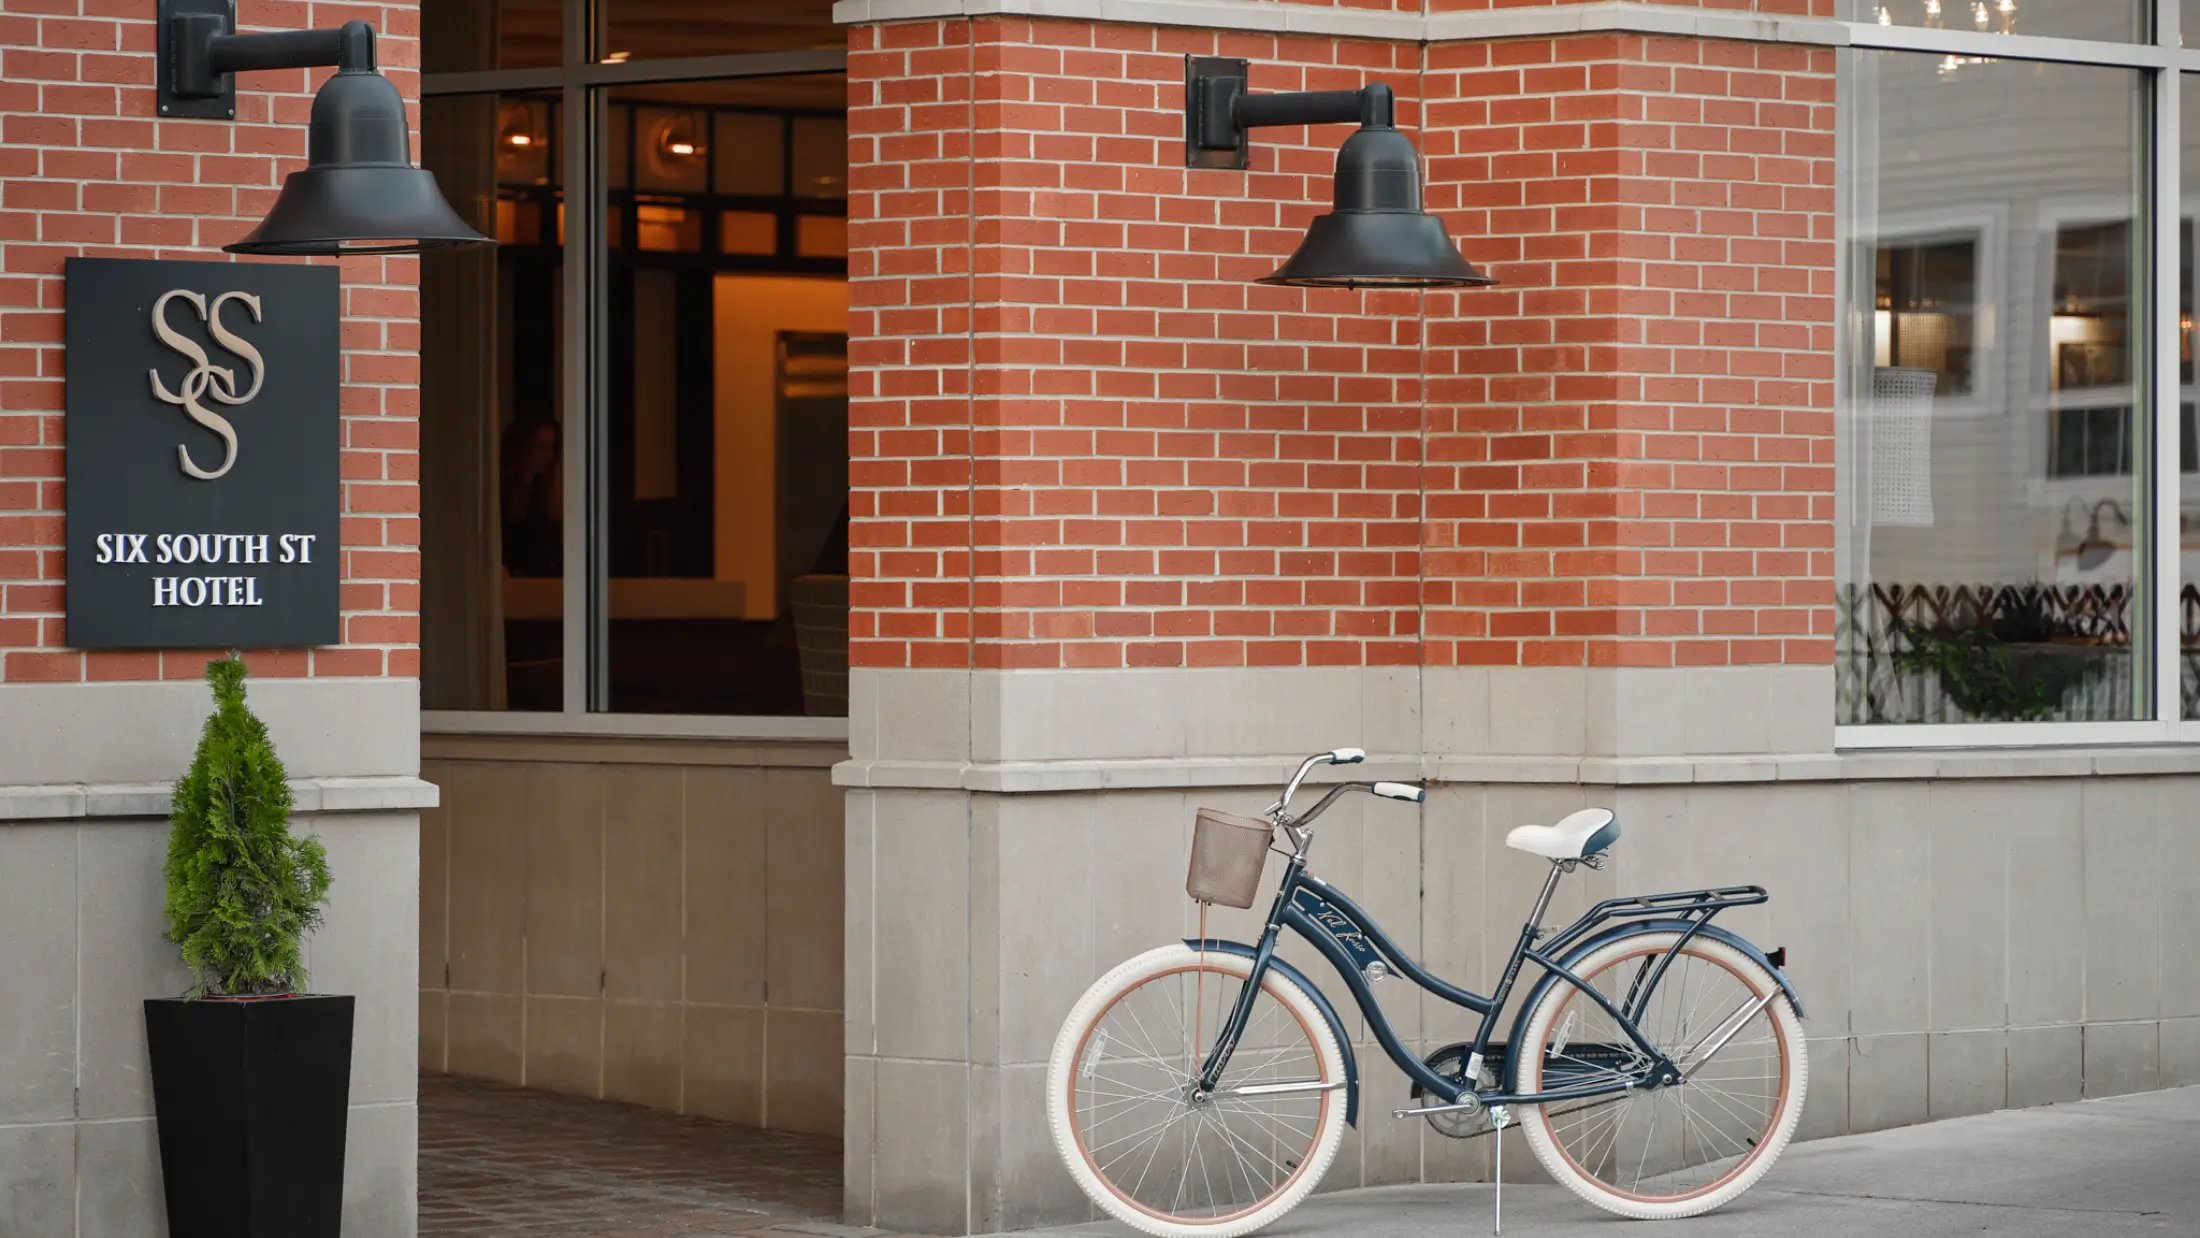 Bicycle near front door of Six South St Hotel, Hanover, New Hampshire.